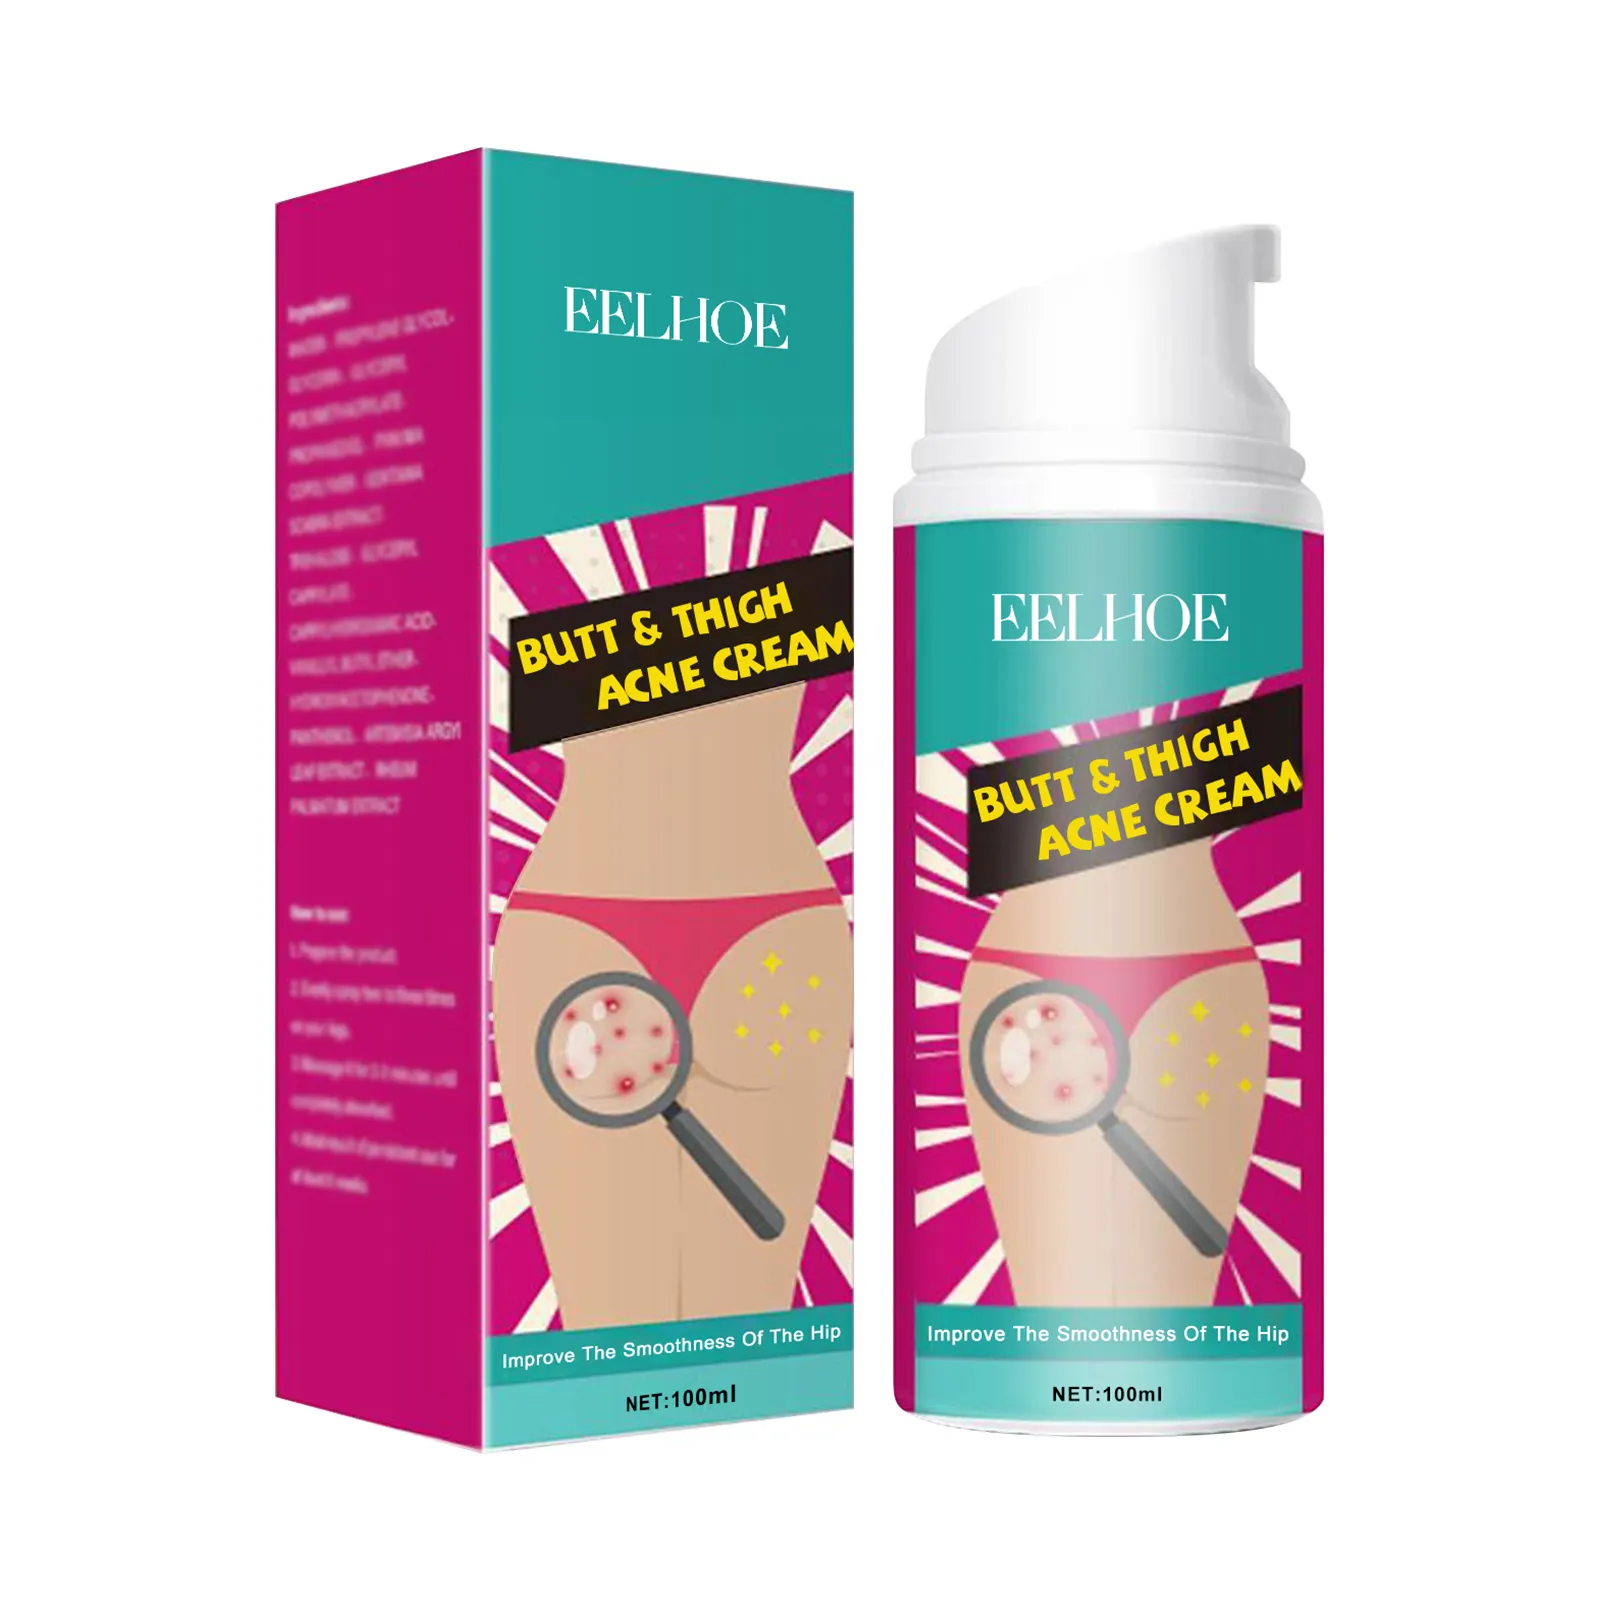 Eelhoe Acne Cure Acnee Tache Traitement Leg Skincare Products for Cream Scar and Acne Mark Removal Gel Ointment